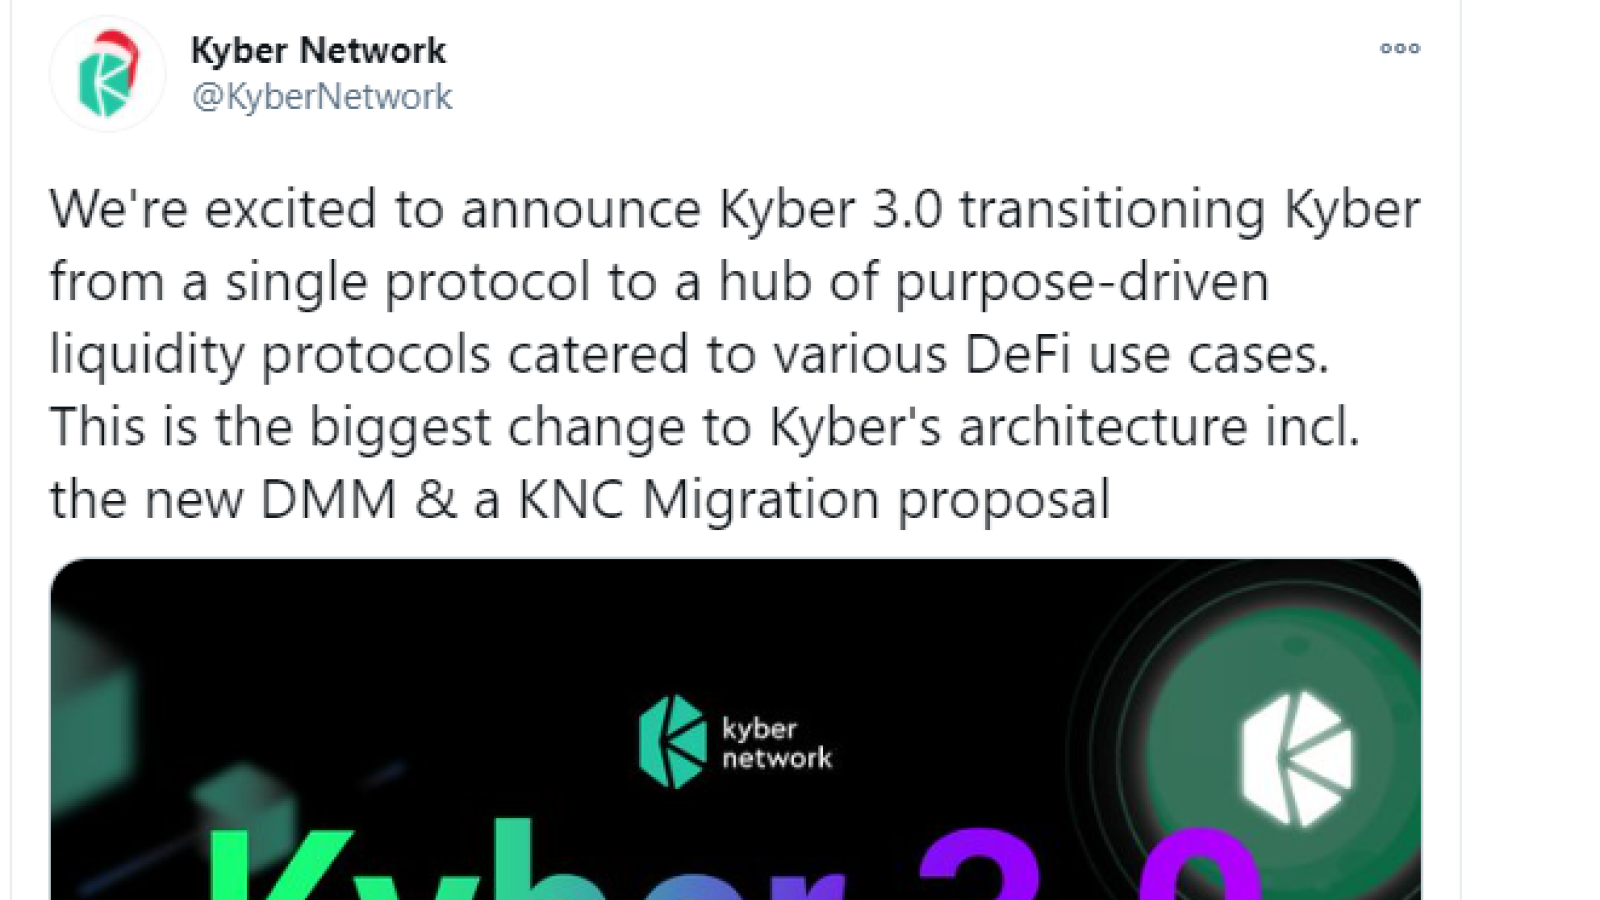 Kyber Network announces migration to Kyber 3.0